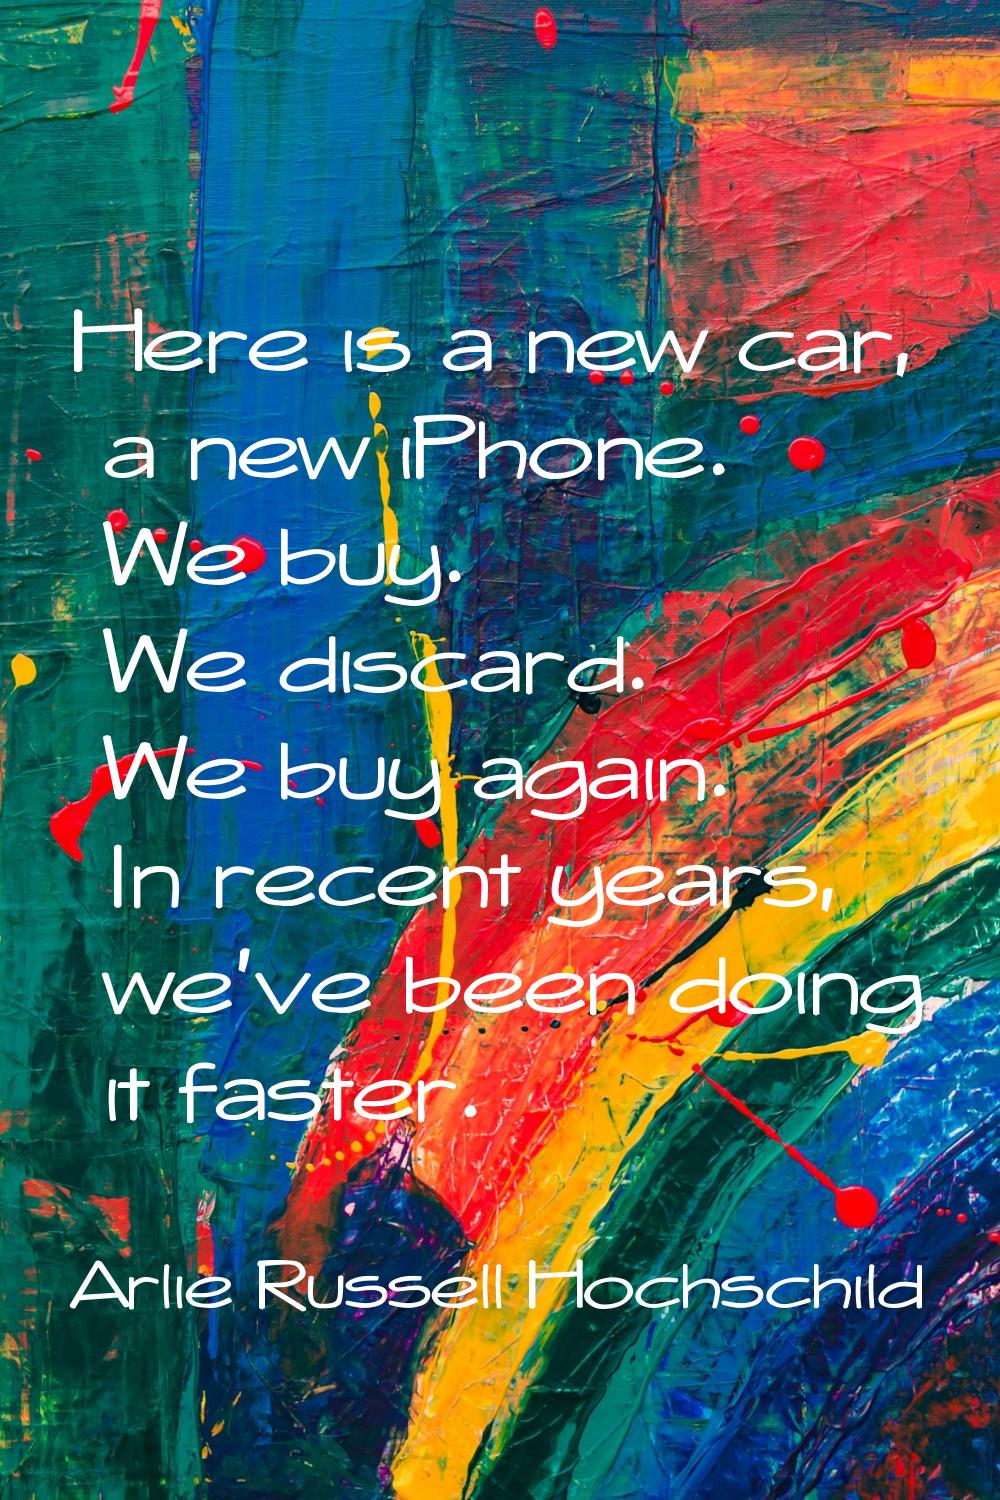 Here is a new car, a new iPhone. We buy. We discard. We buy again. In recent years, we've been doin